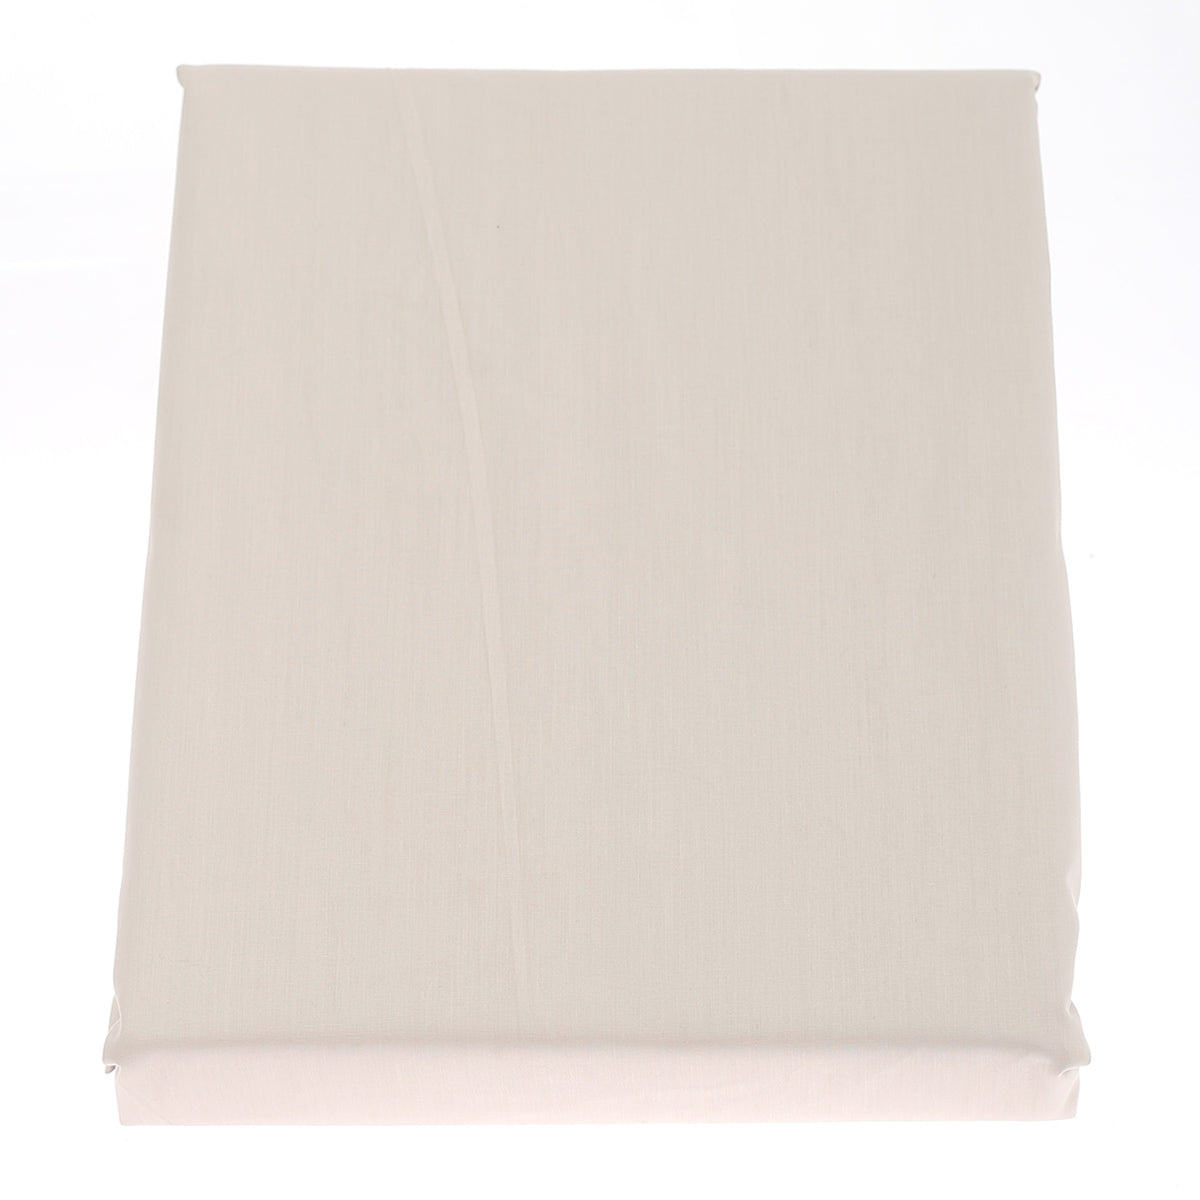 Beige Dyed Double Bedding Set of 6